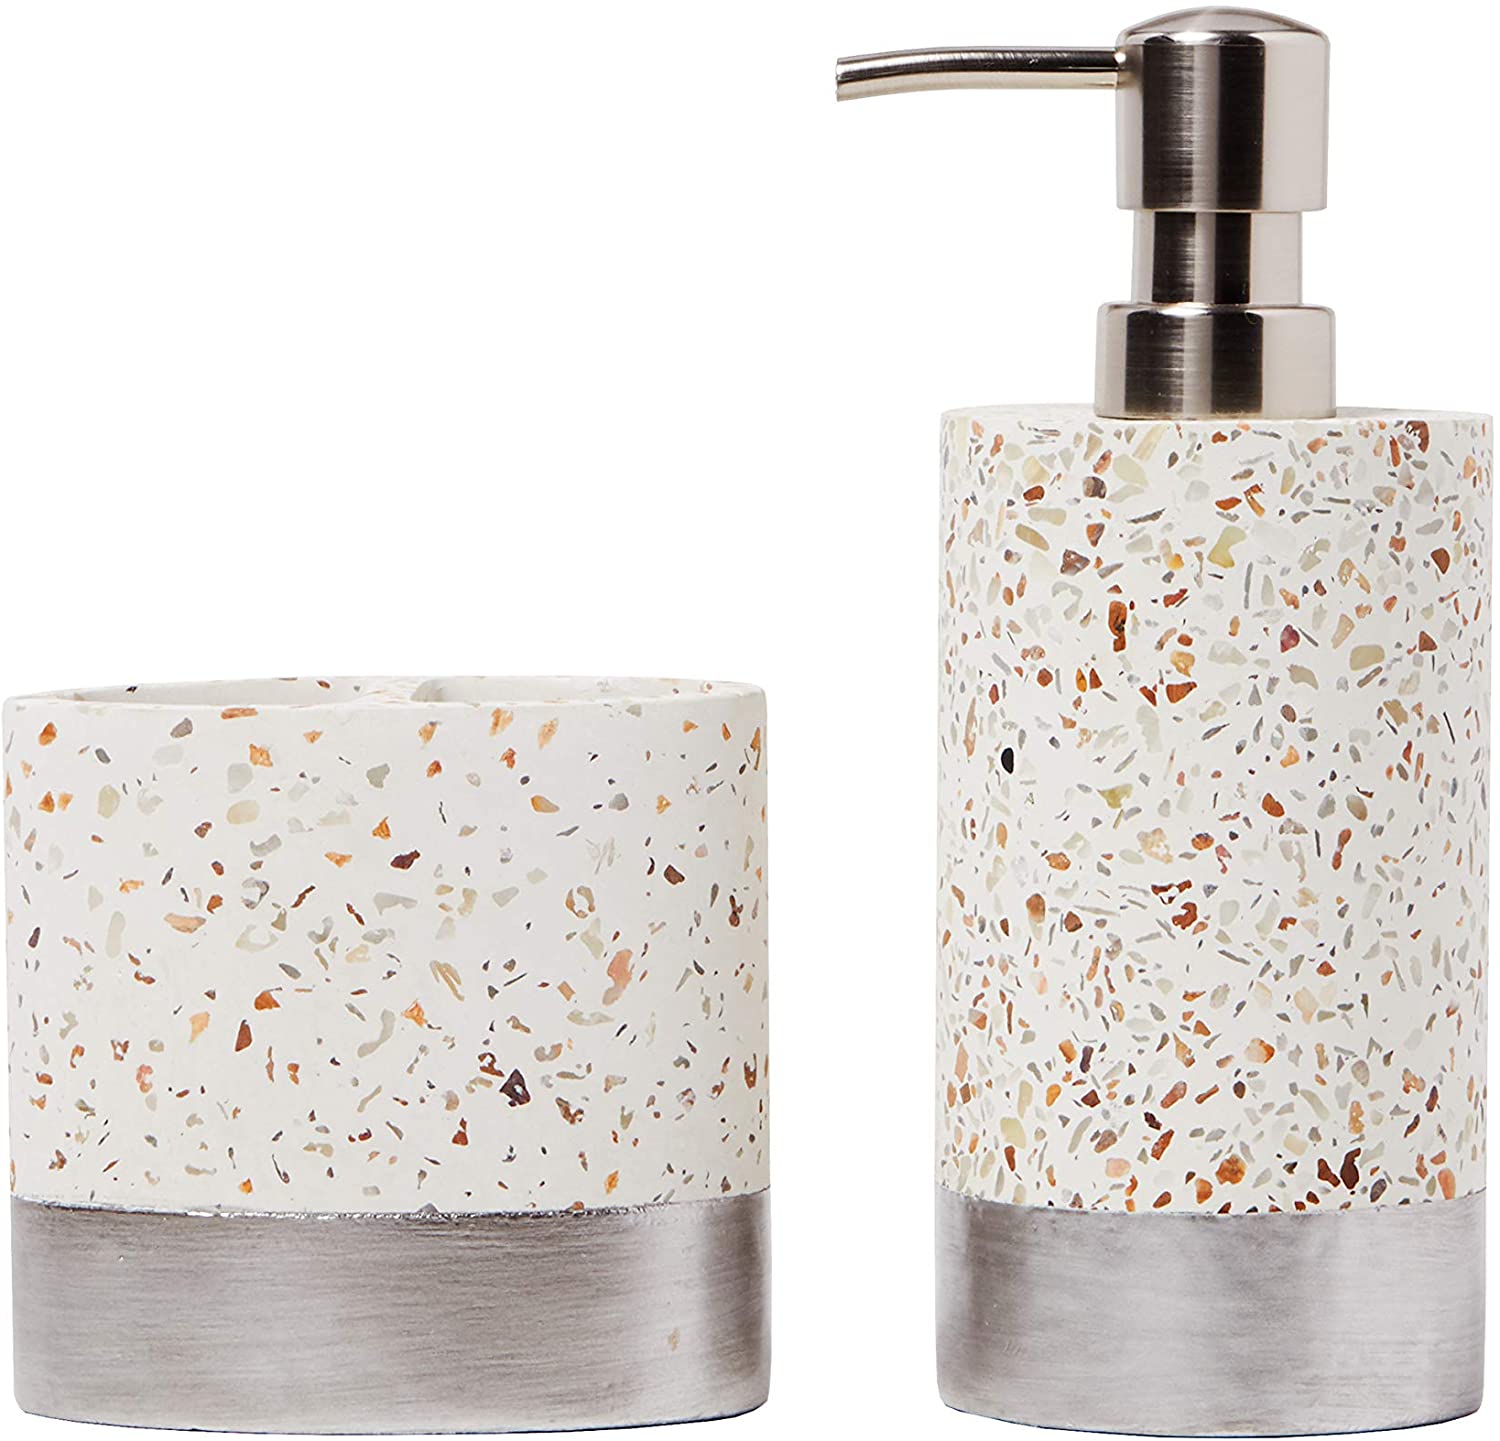 Terazzo toothbrush holder and soap dispenser